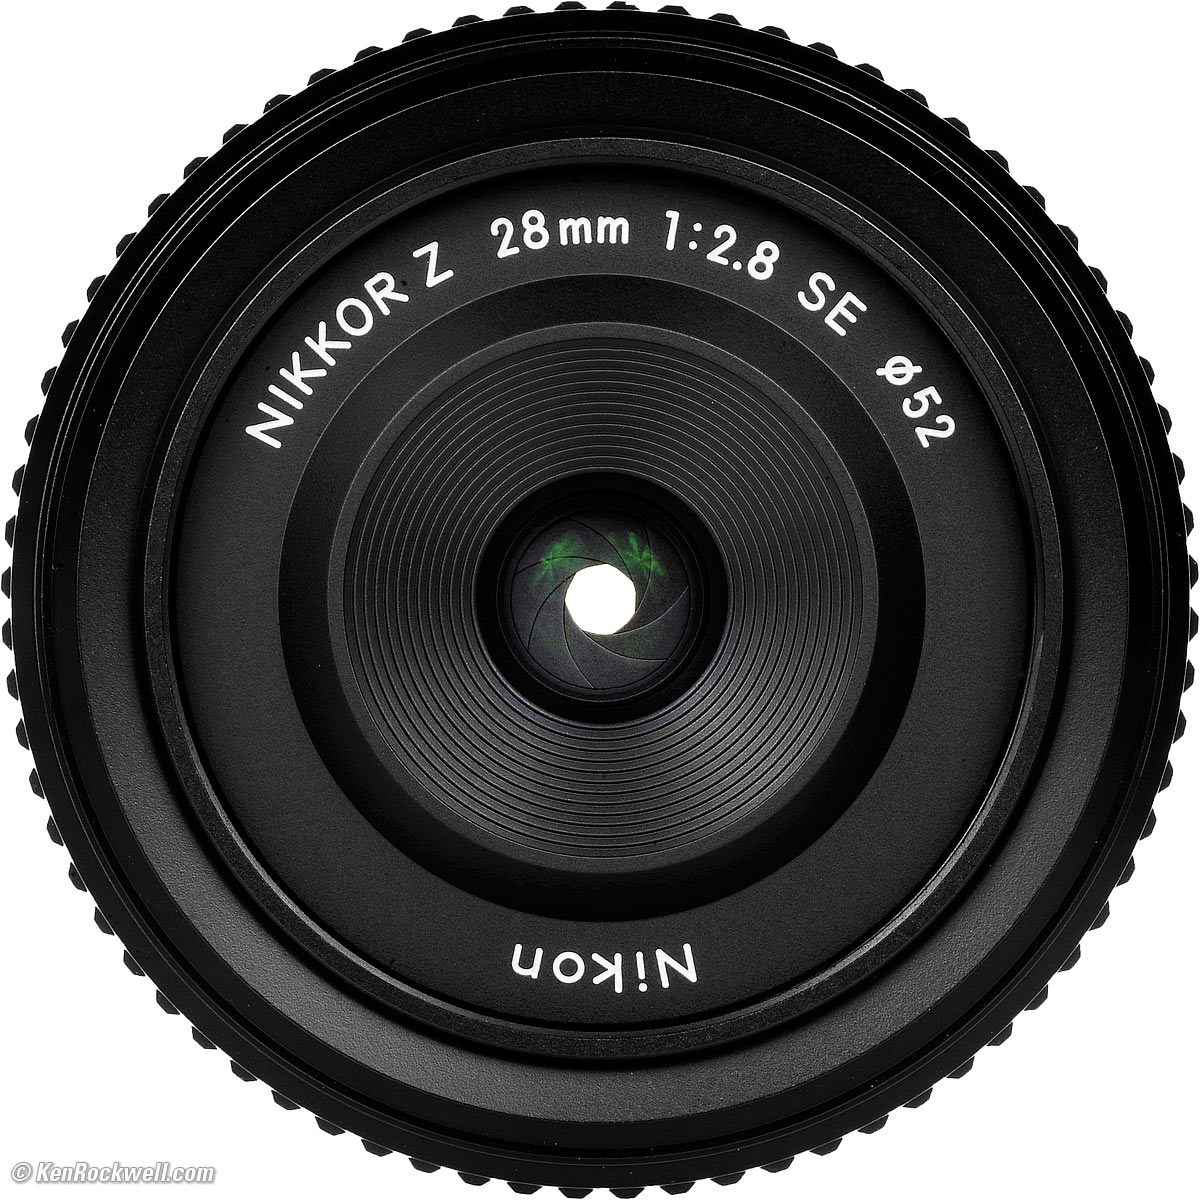 Nikon Z 28mm f/2.8 SE Special Edition Review & Sample Images by